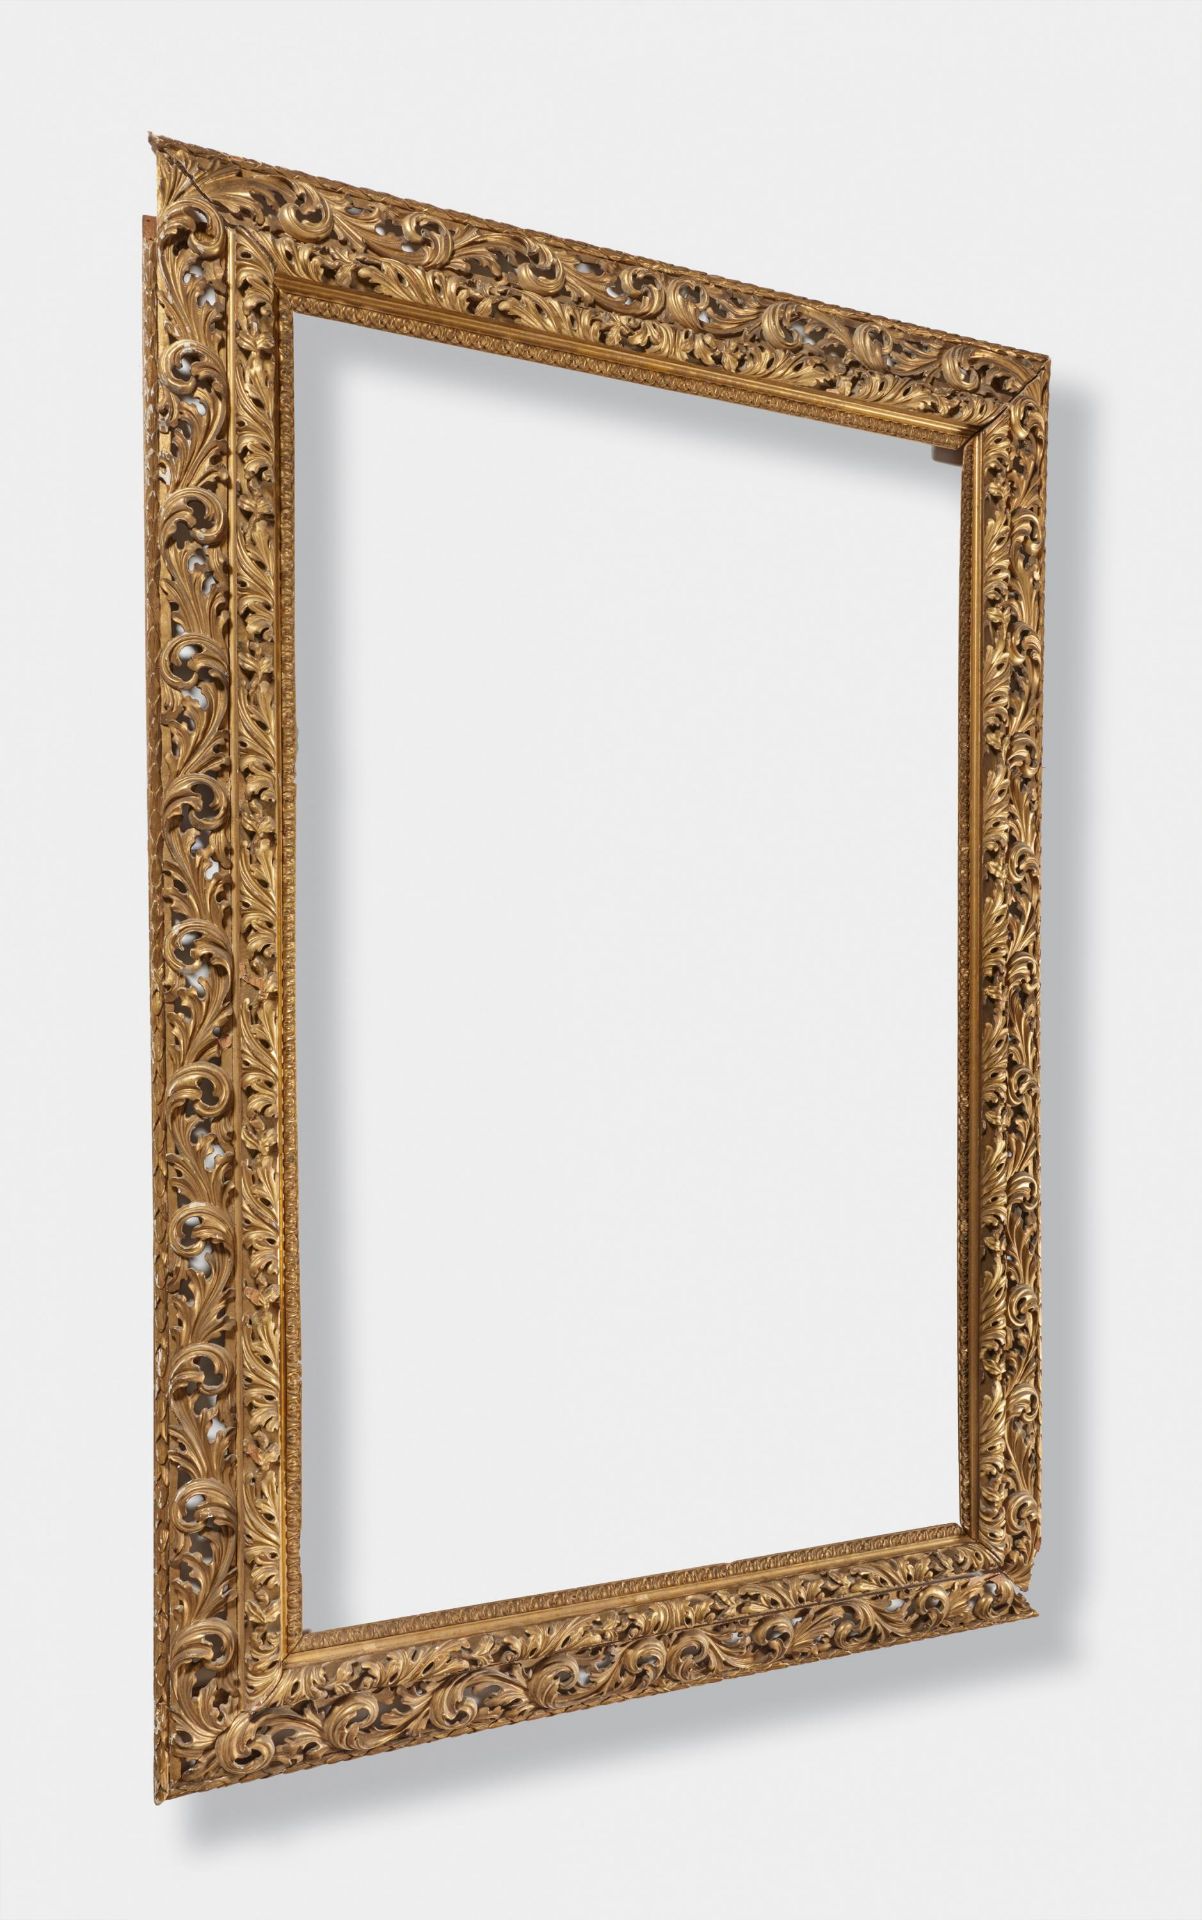 Bologna: Four Singular Sides of the Frame in the Style of the Bolognese Floral Frame - Image 2 of 4